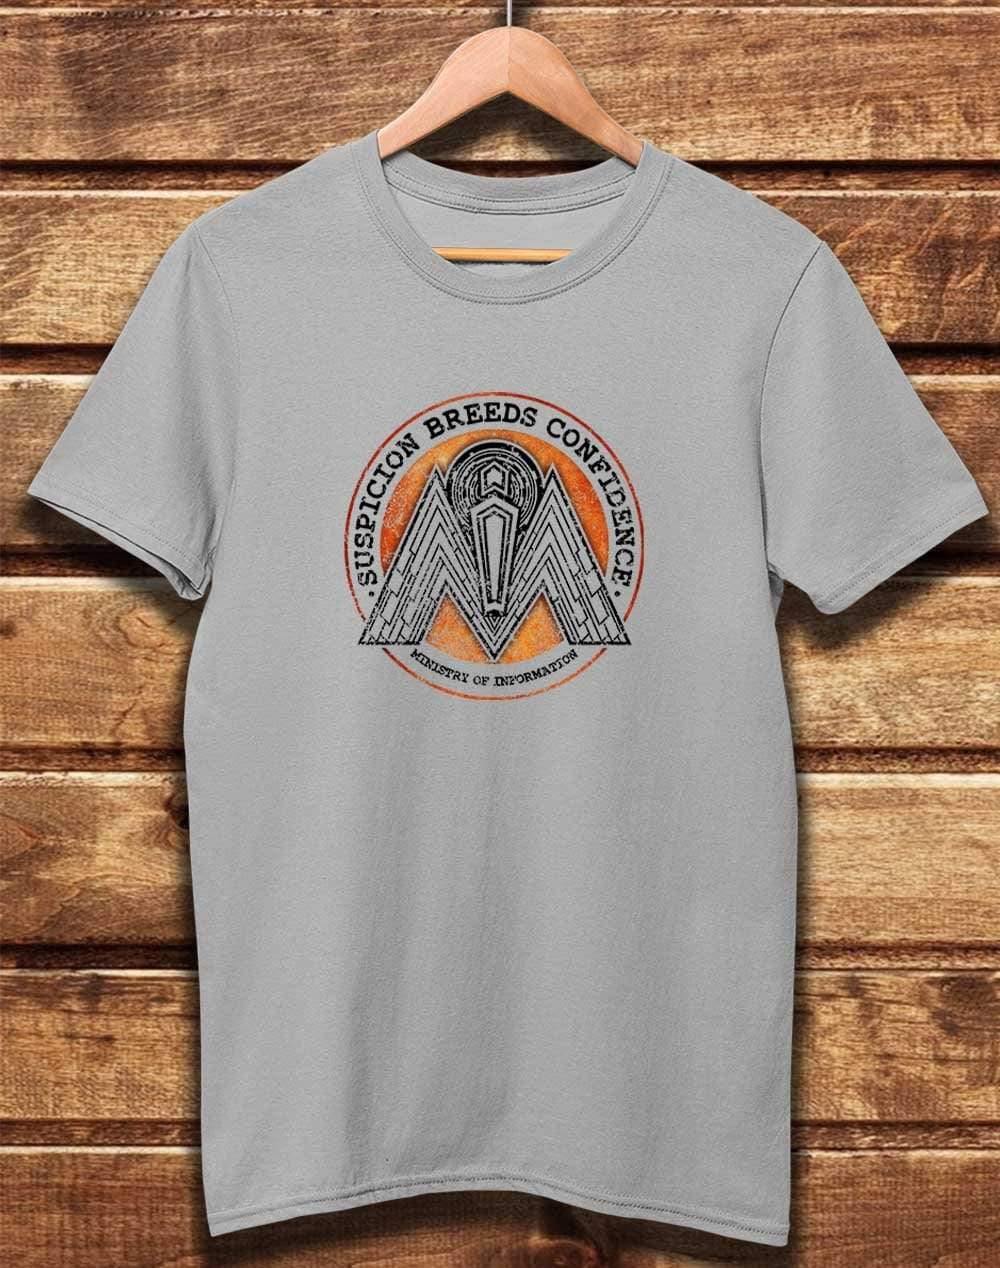 DELUXE Ministry of Information Organic Cotton T-Shirt XS / Light Grey  - Off World Tees